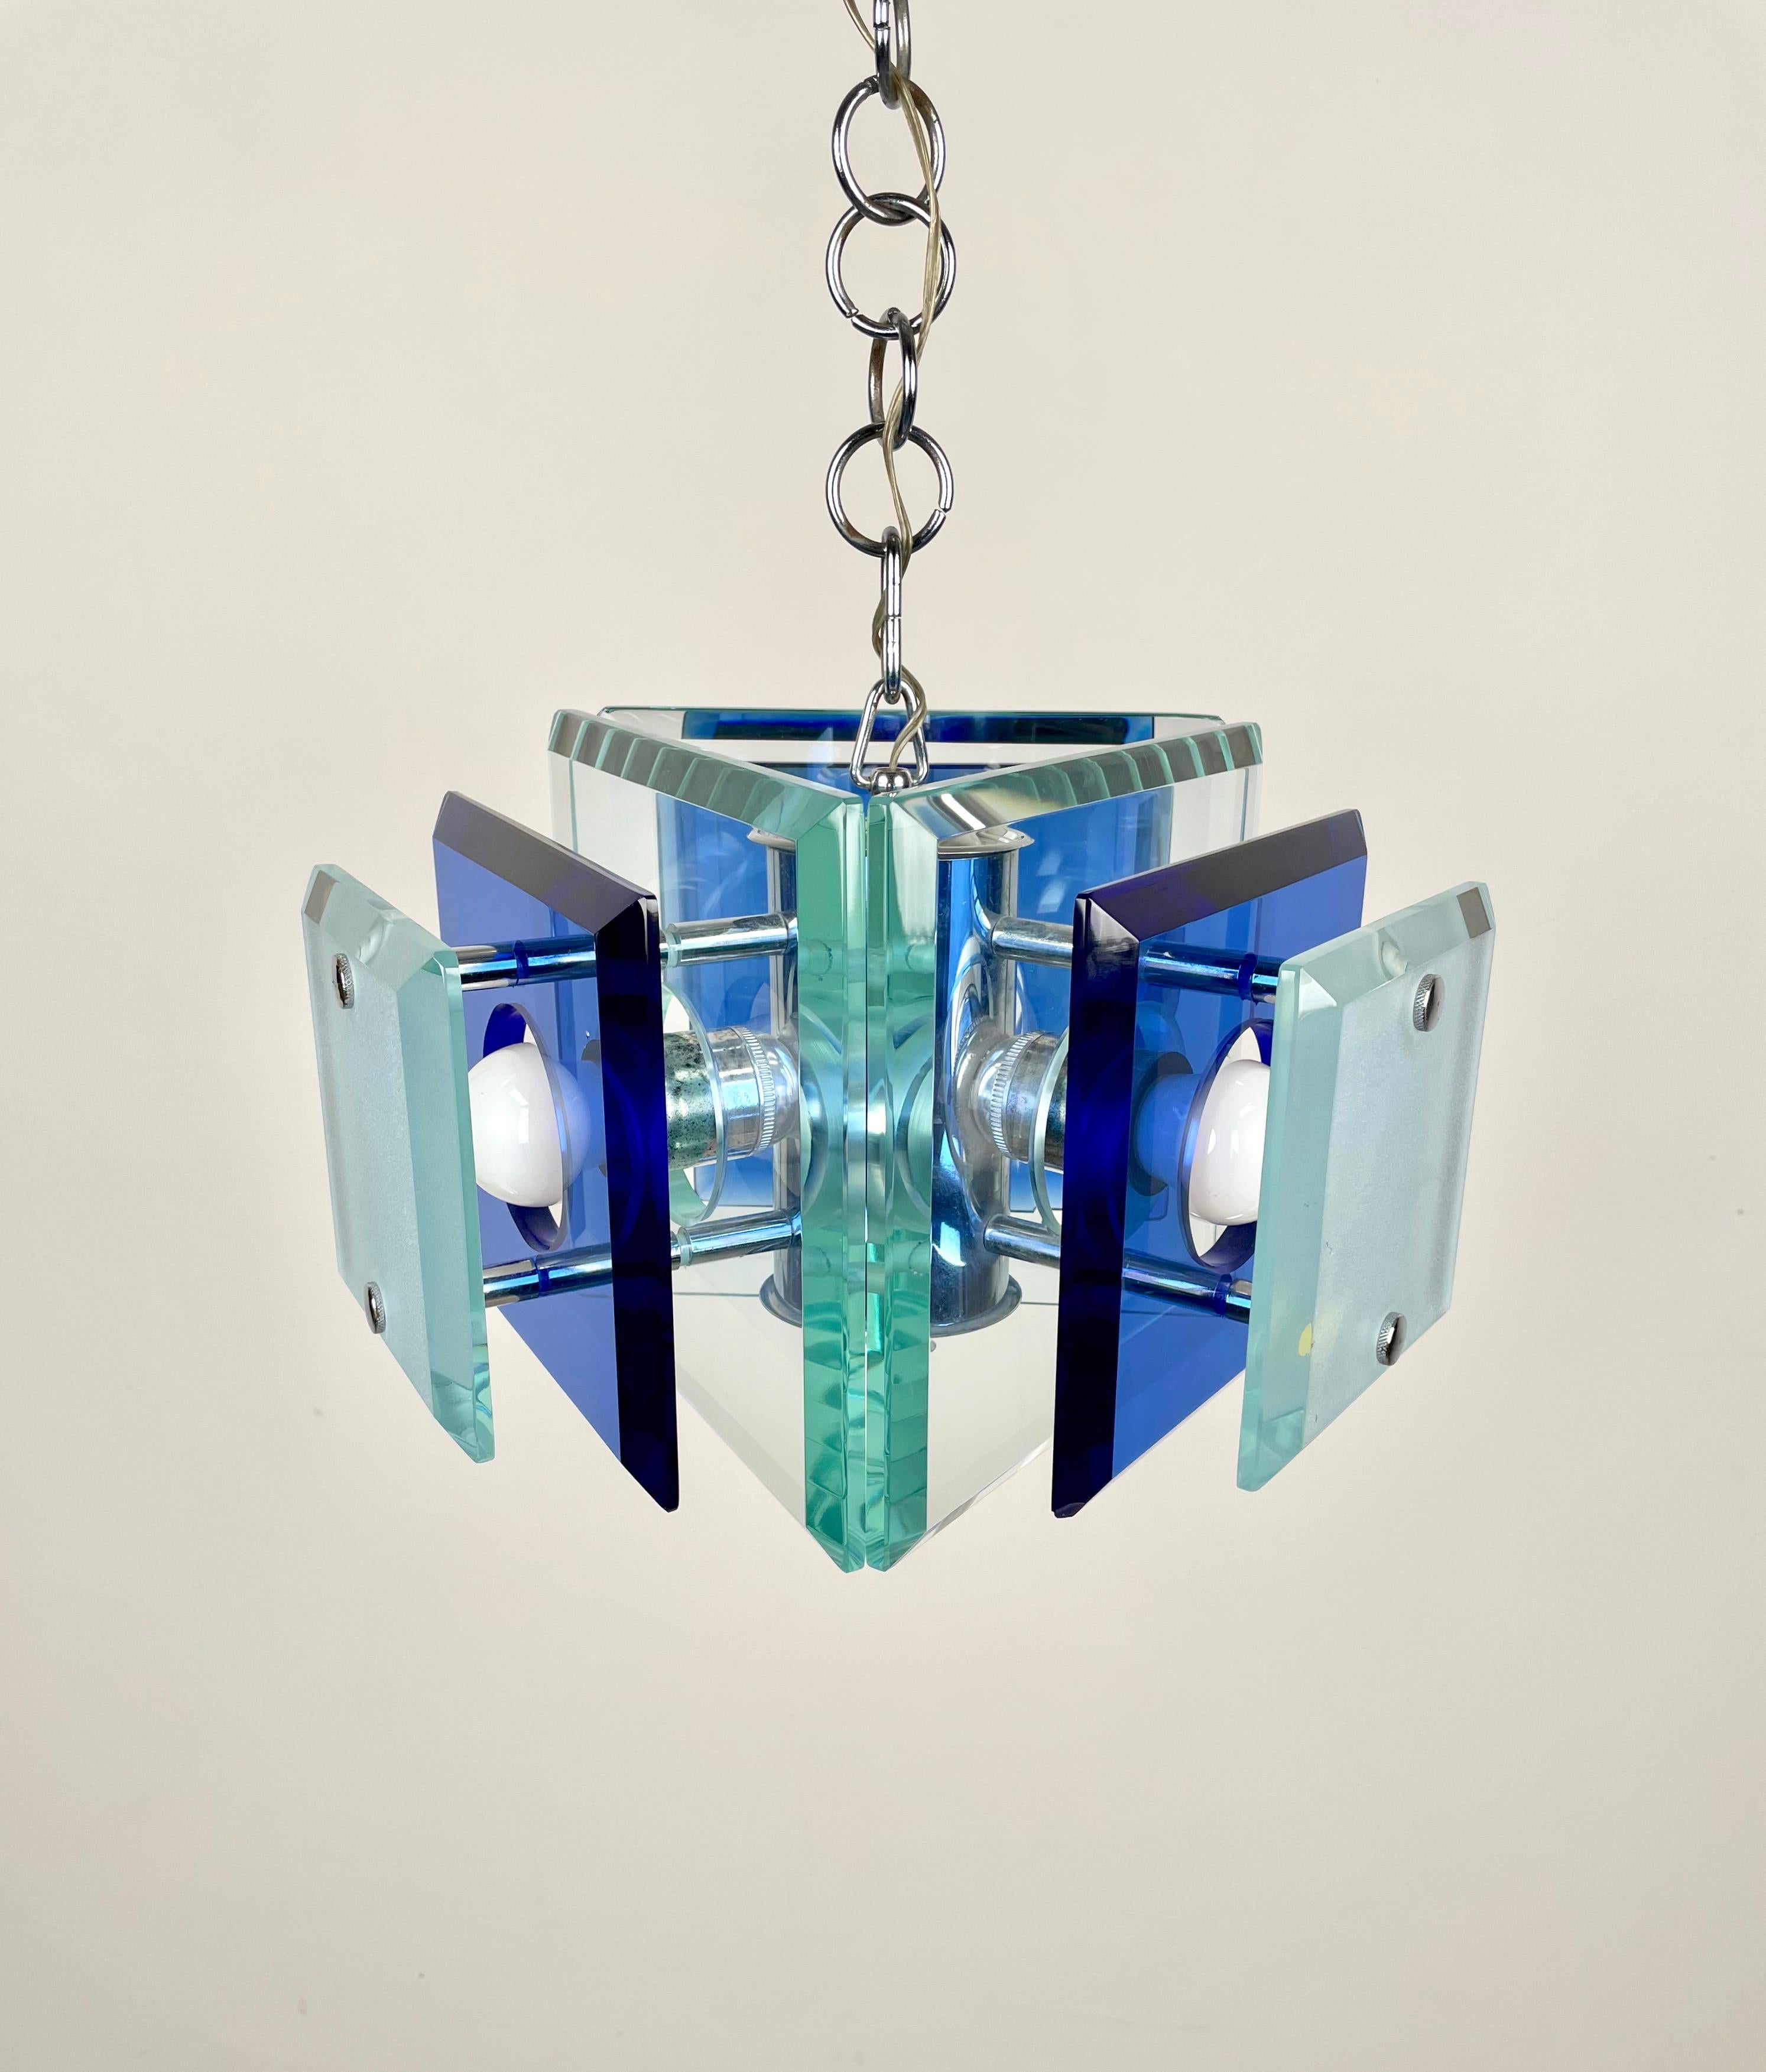 Lupi Cristal Luxor Blue Glass and Chrome Chandelier, Italy, 1970s For Sale 4